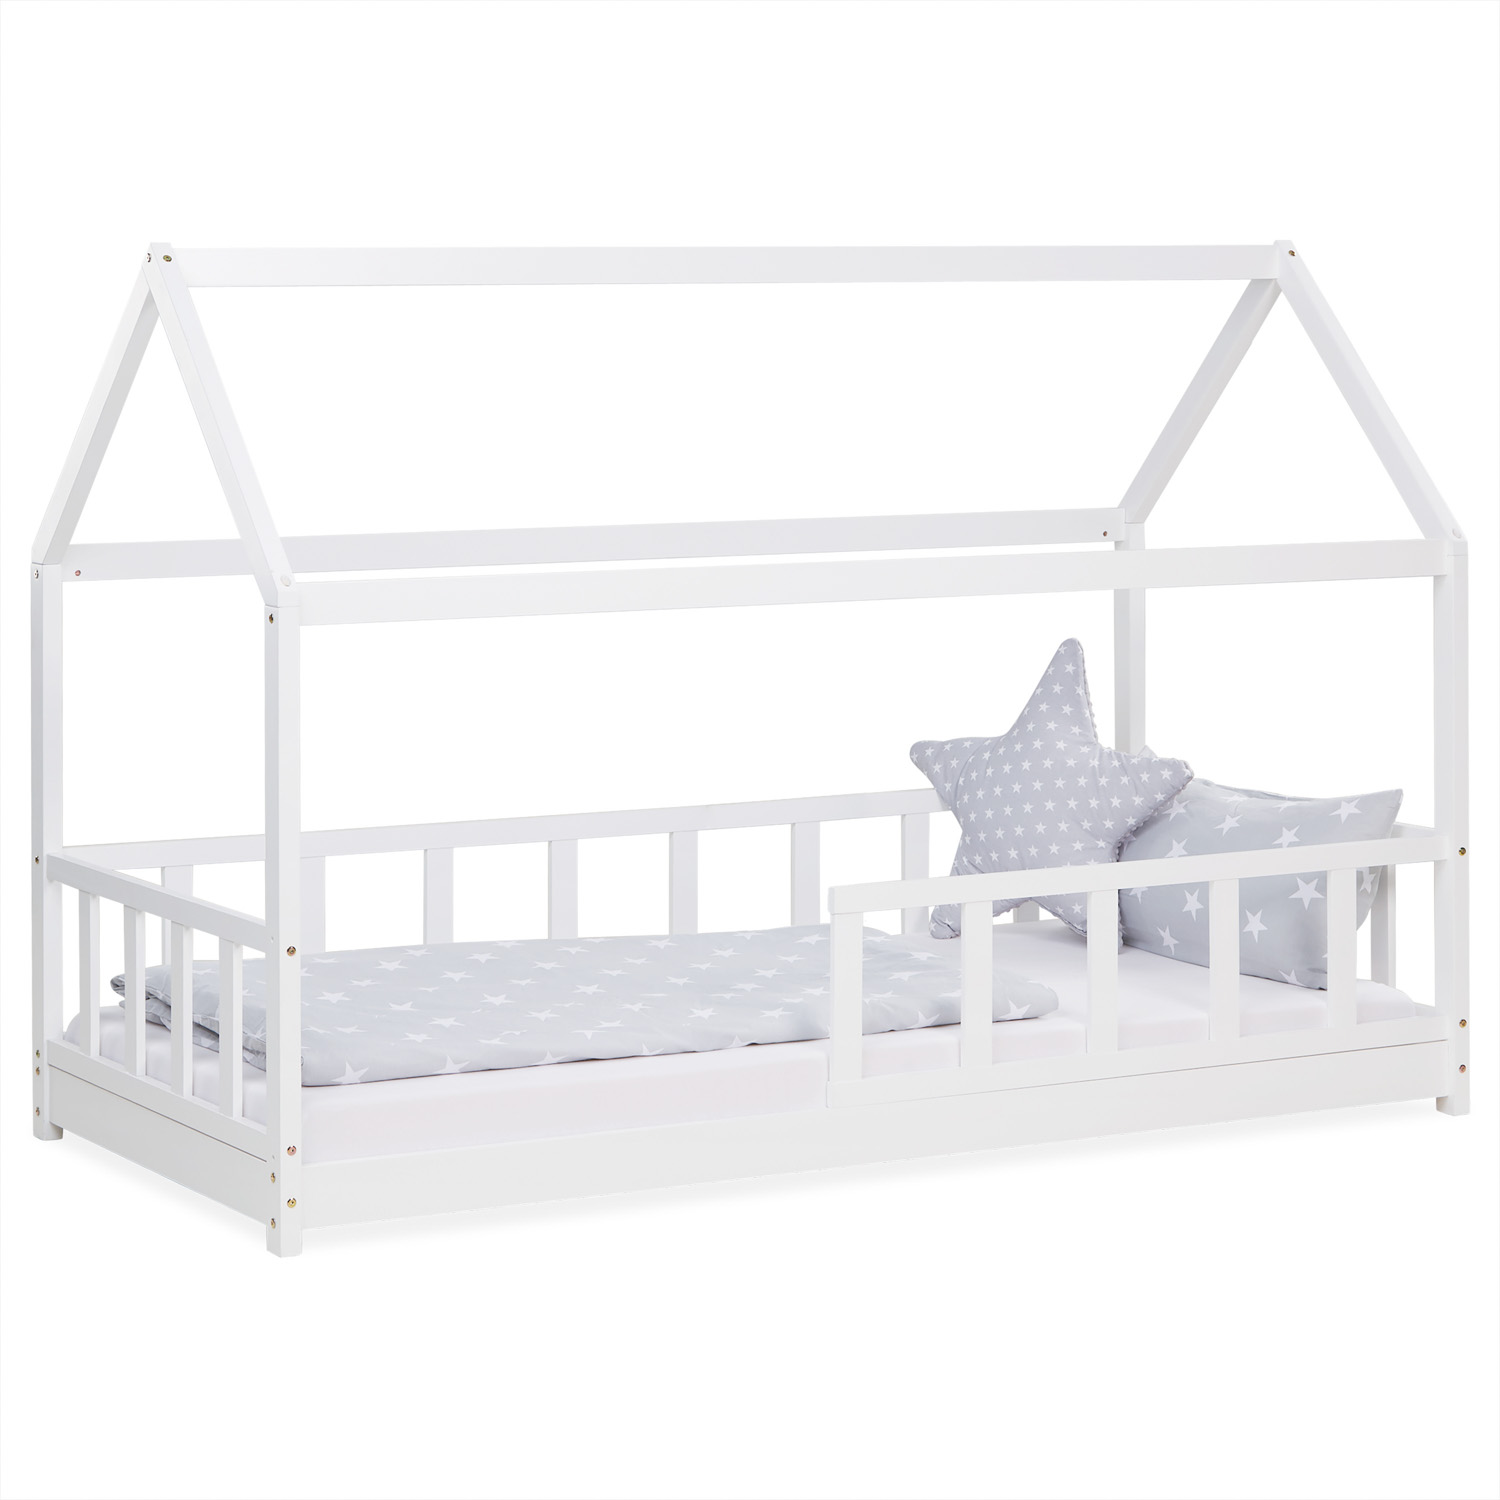 Children's Bed 90x200 cm House Bed with Barriers Childrens Single Bed Montessori Bed Treehouse Bed